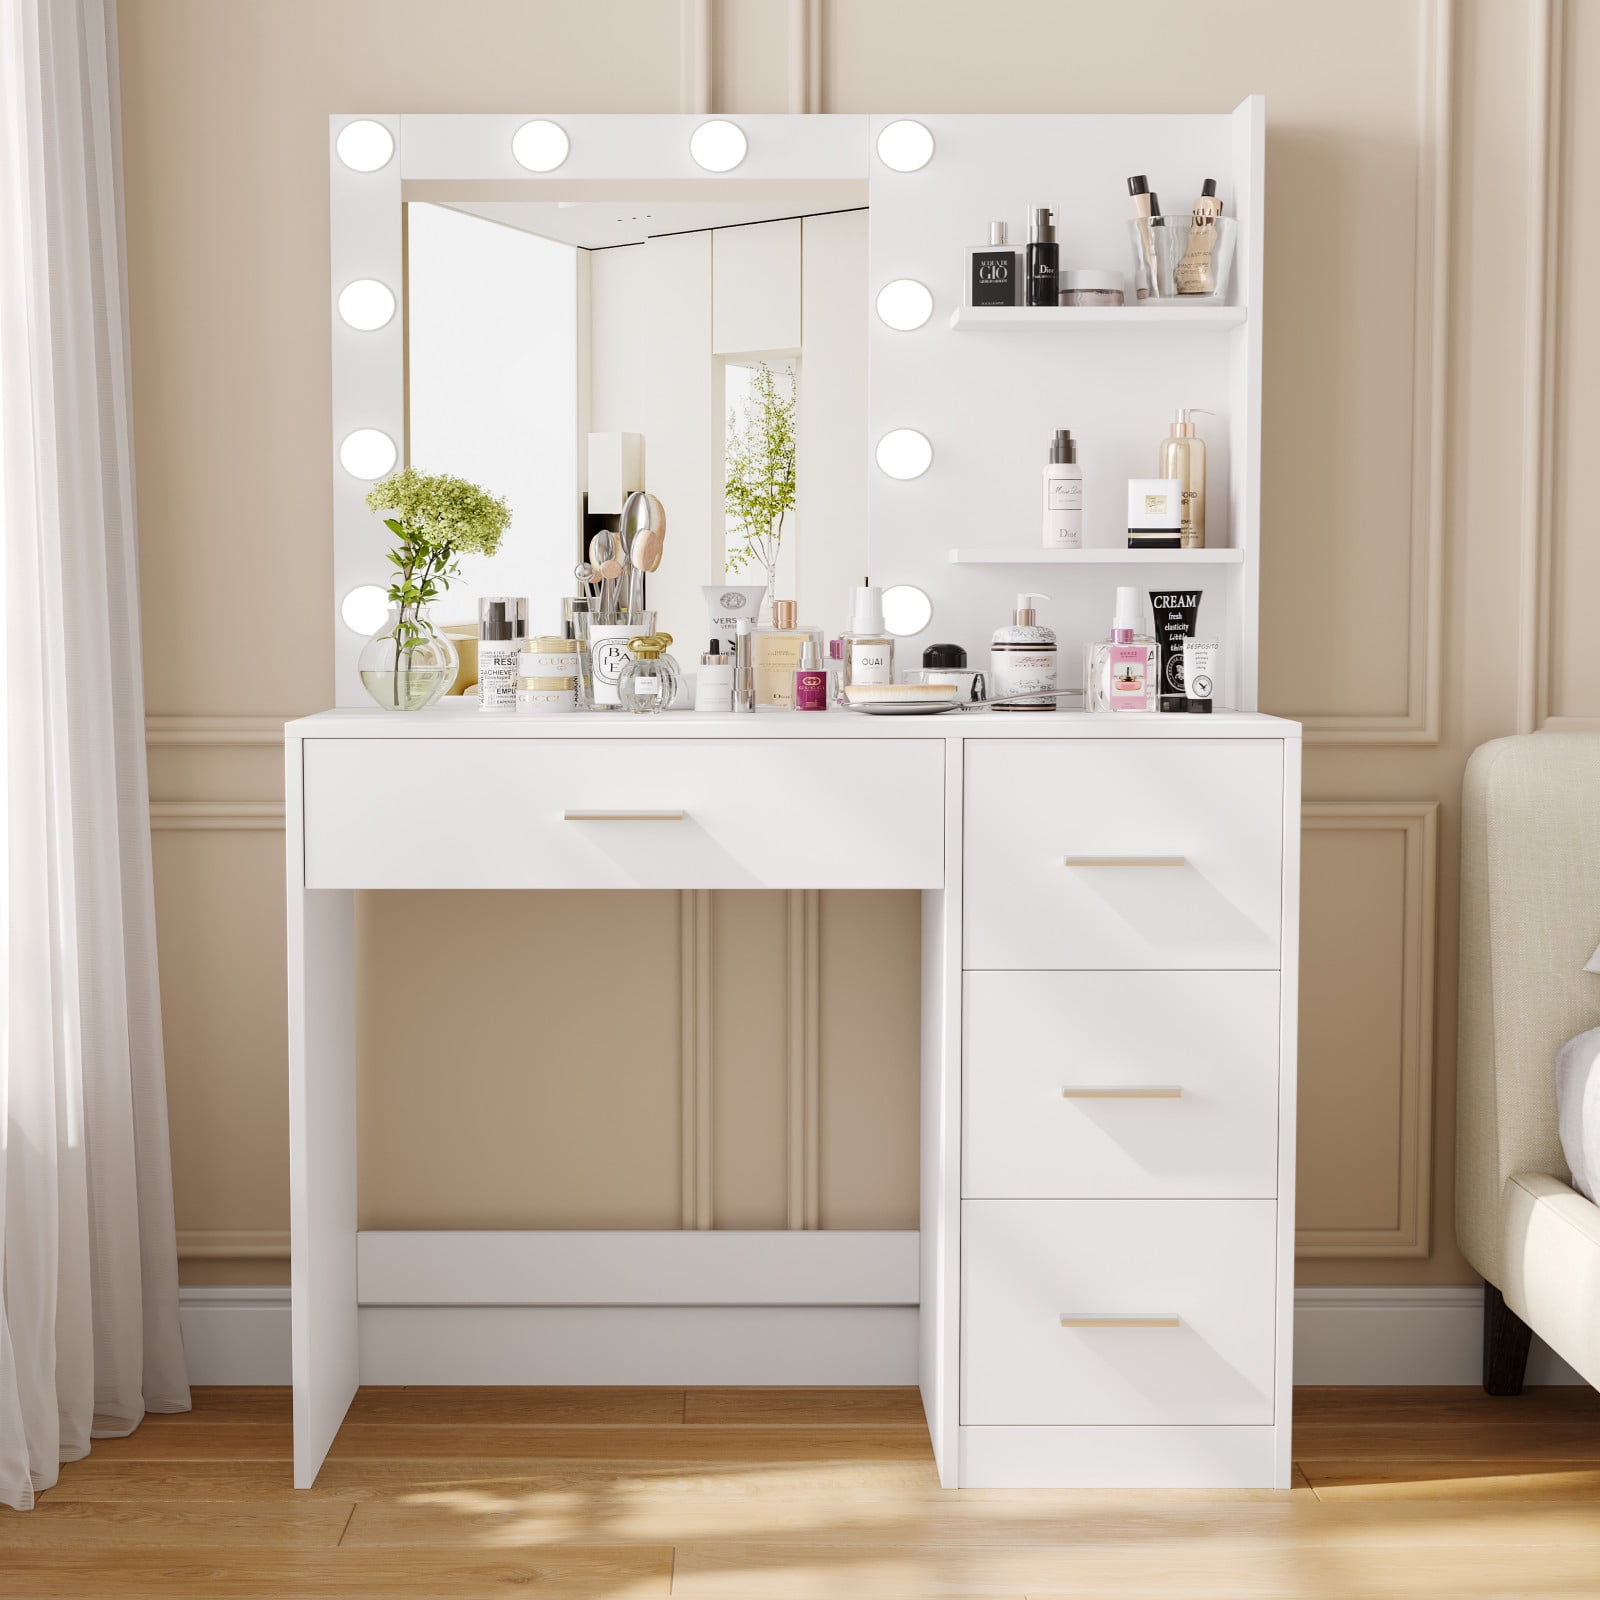 Rovaurx Makeup Vanity Table with Lighted Mirror, Makeup Vanity Desk Storage Shelf and 4 Drawers, Bedroom Dressing Table, 10 LED Lights, White RSZT104W - Walmart.com